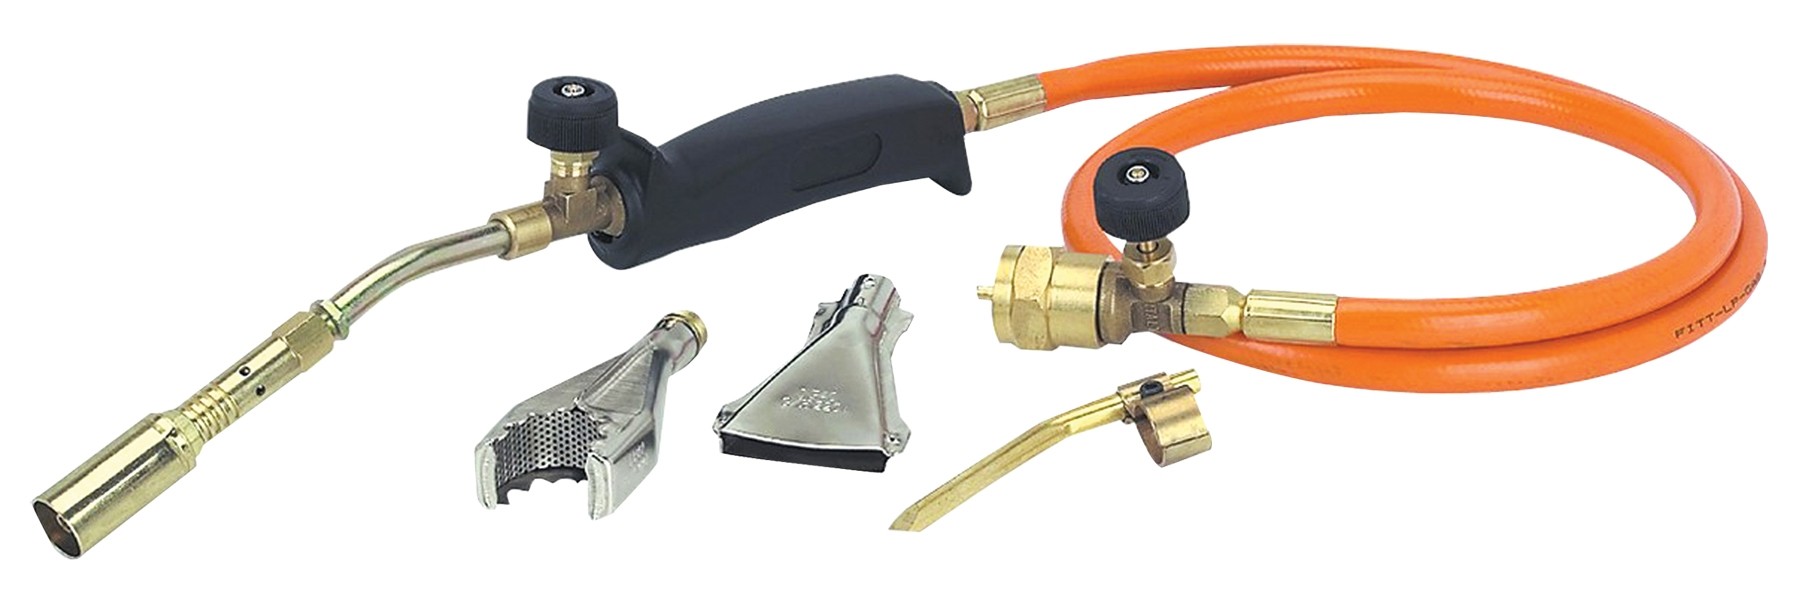 Lp Gas Torch Store, SAVE 54%